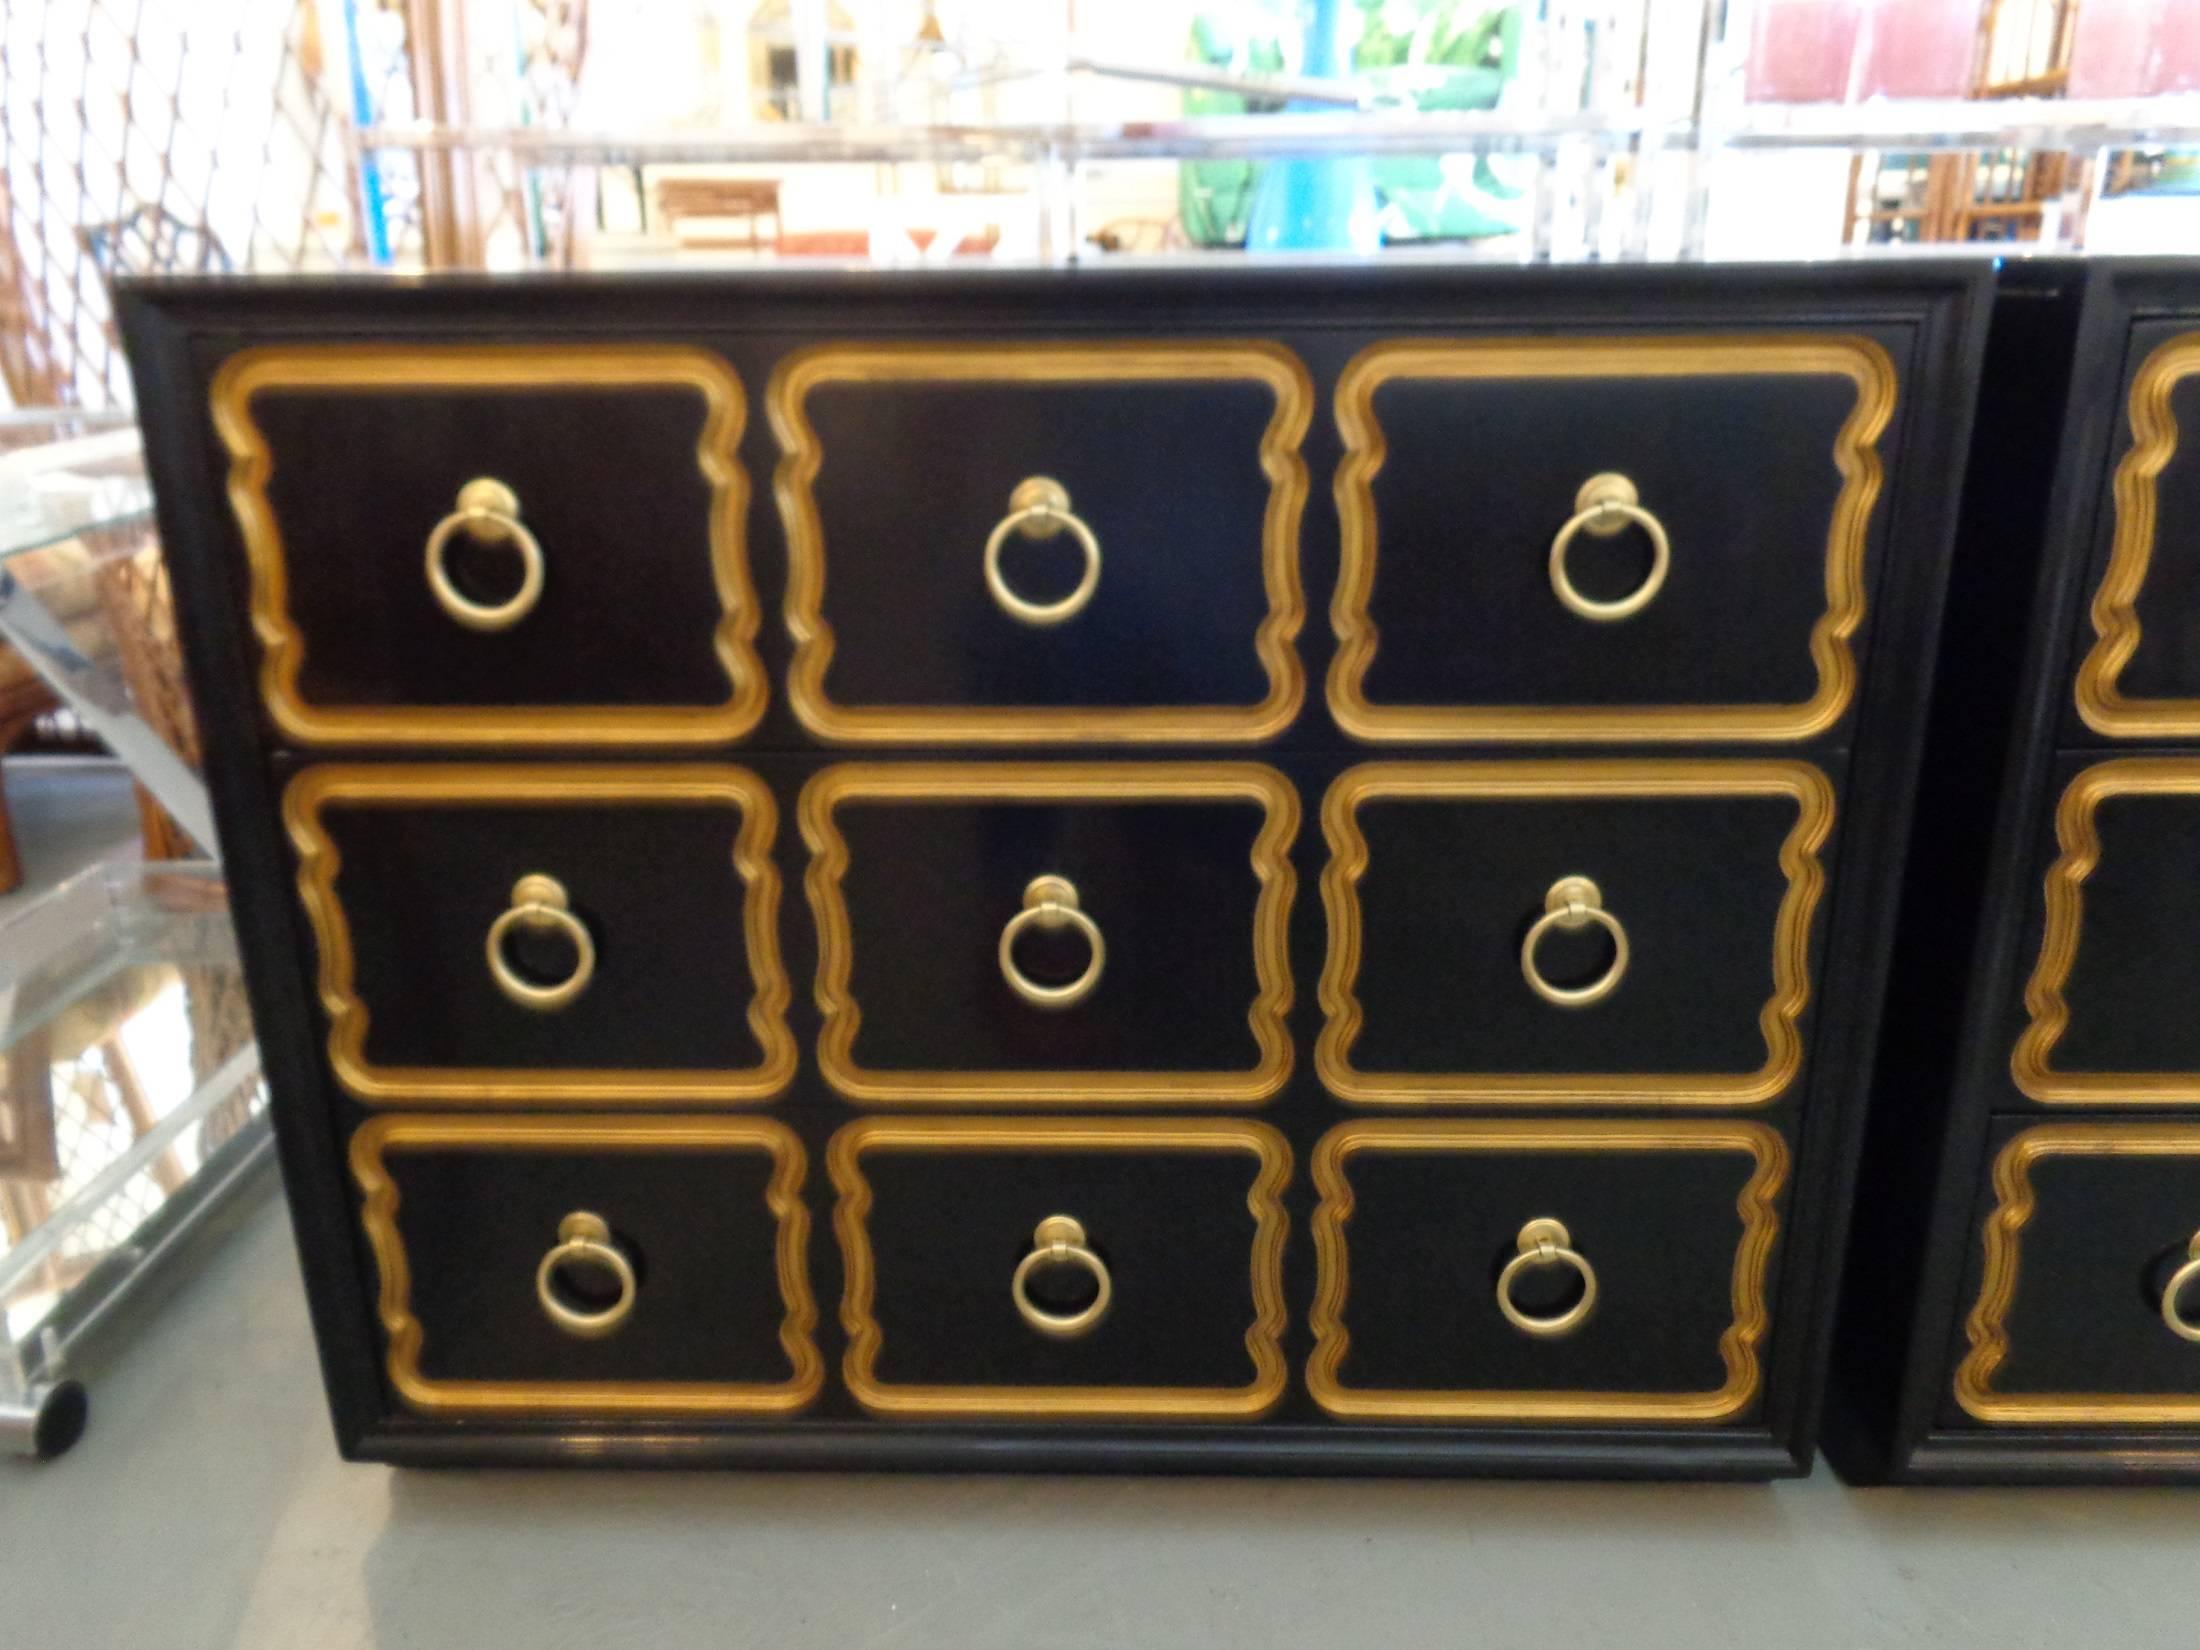 Pair of Hollywood Regency style Dorothy Draper Espana chests in nice as found vintage condition. There are minor imperfections to the newly lacquered finish.